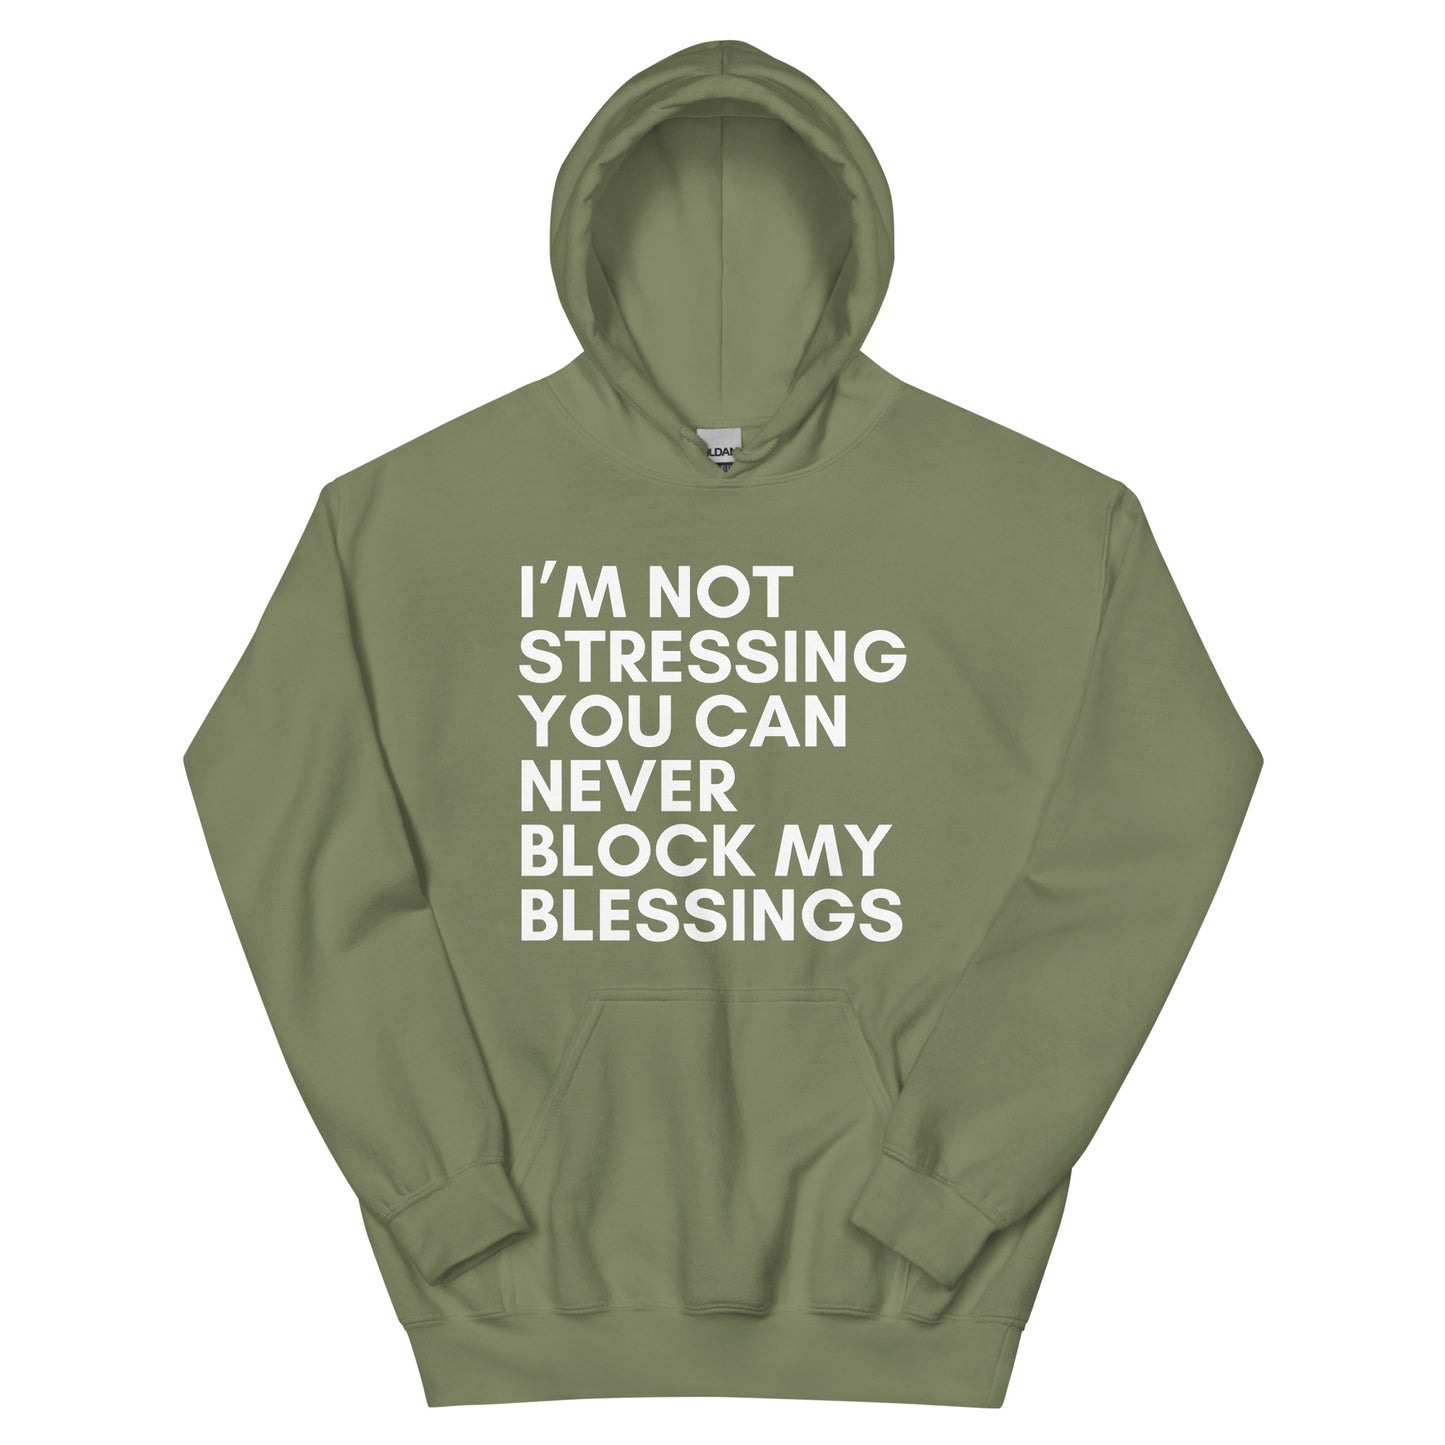 "You Can Never Block My Blessings" Hoodie (white print)